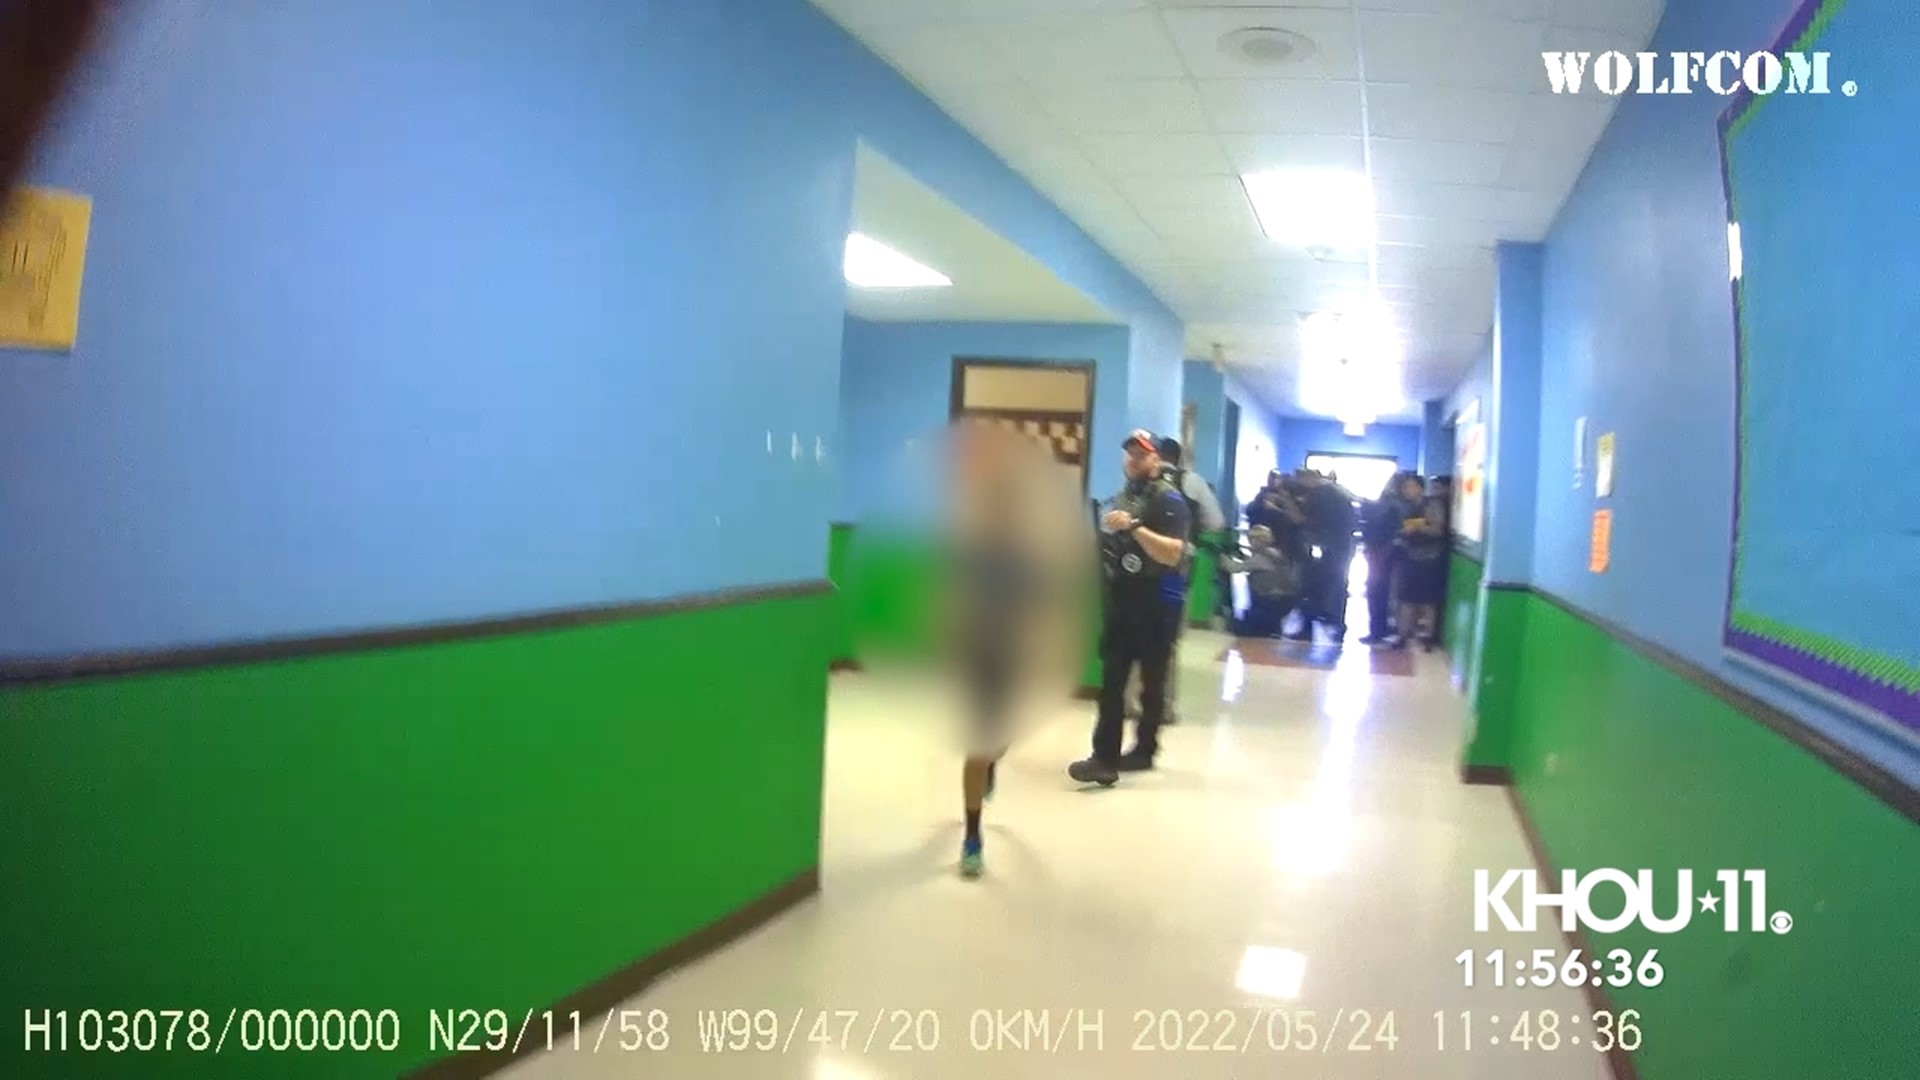 In his bodycam footage, Mendoza can be seen running toward the school, and telling his fellow officers to duck and cover.